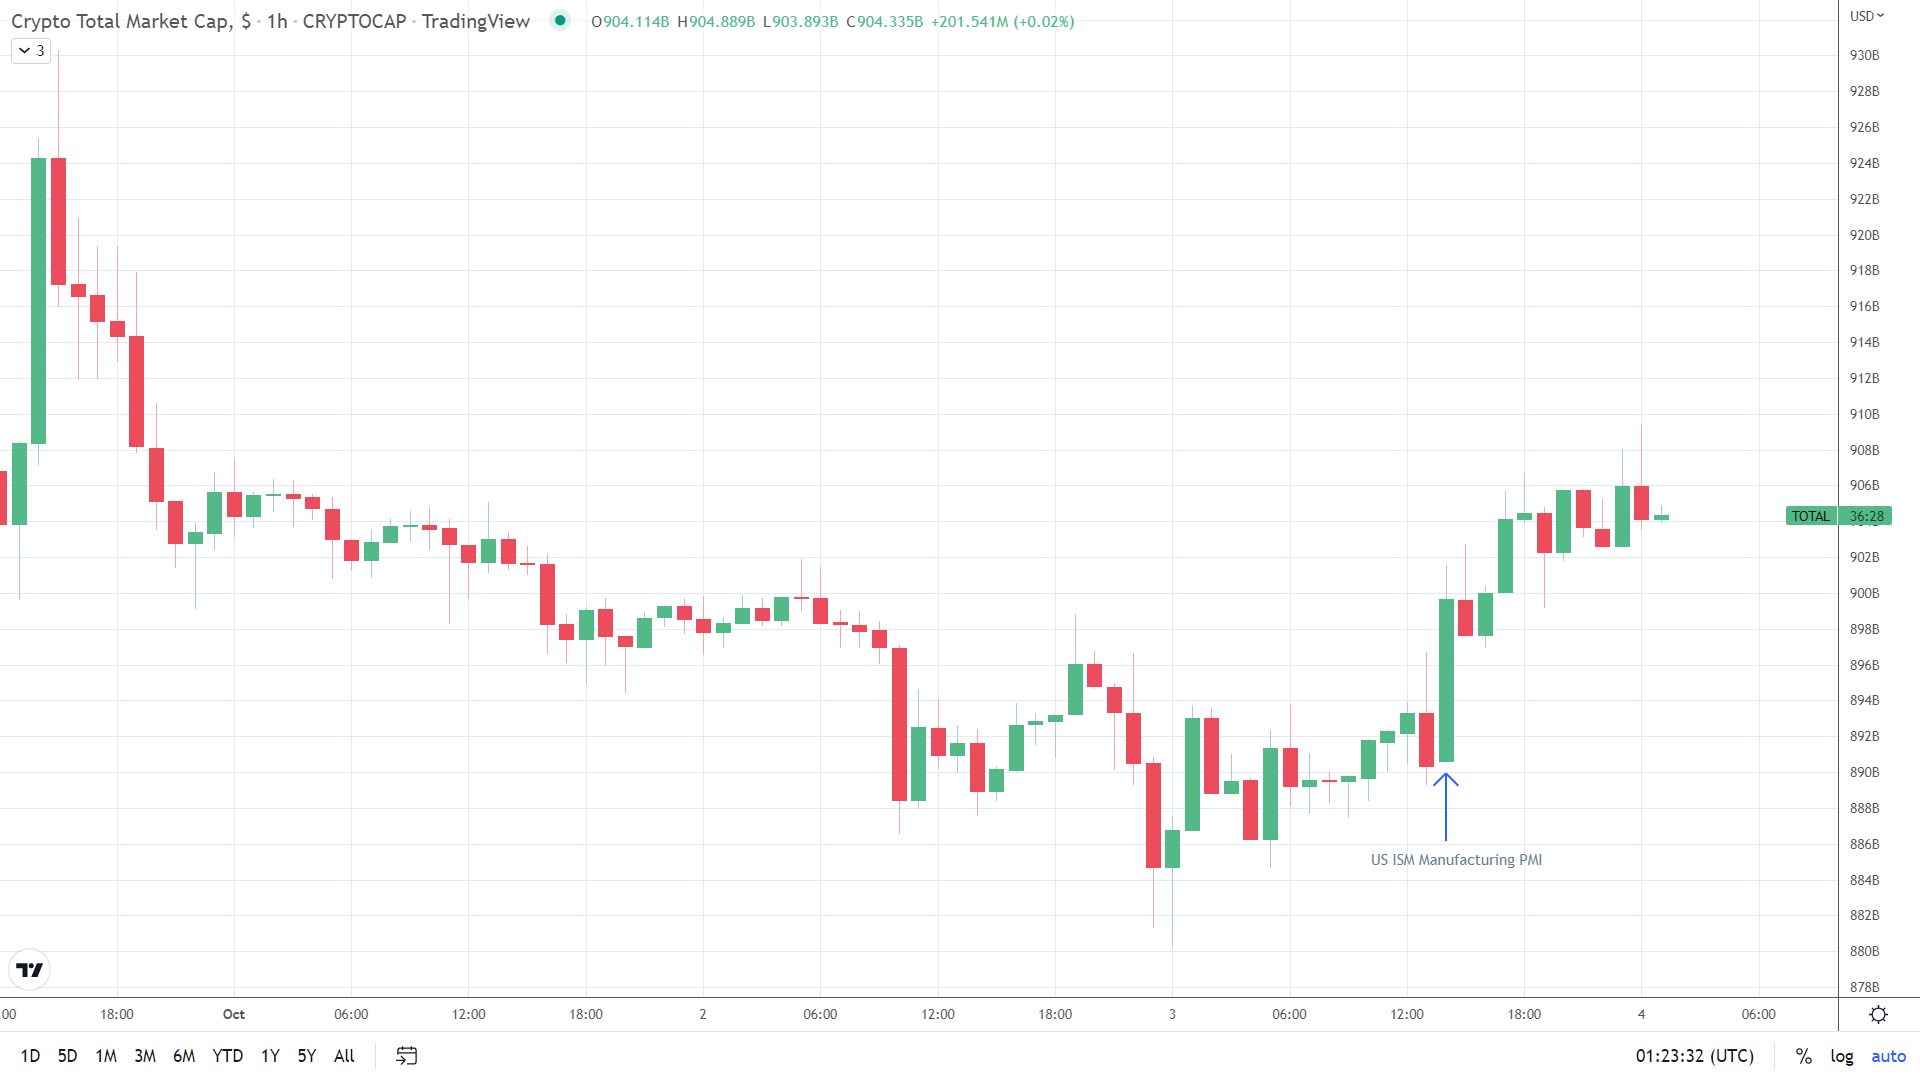 Crypto market responds to US ISM PMI numbers.